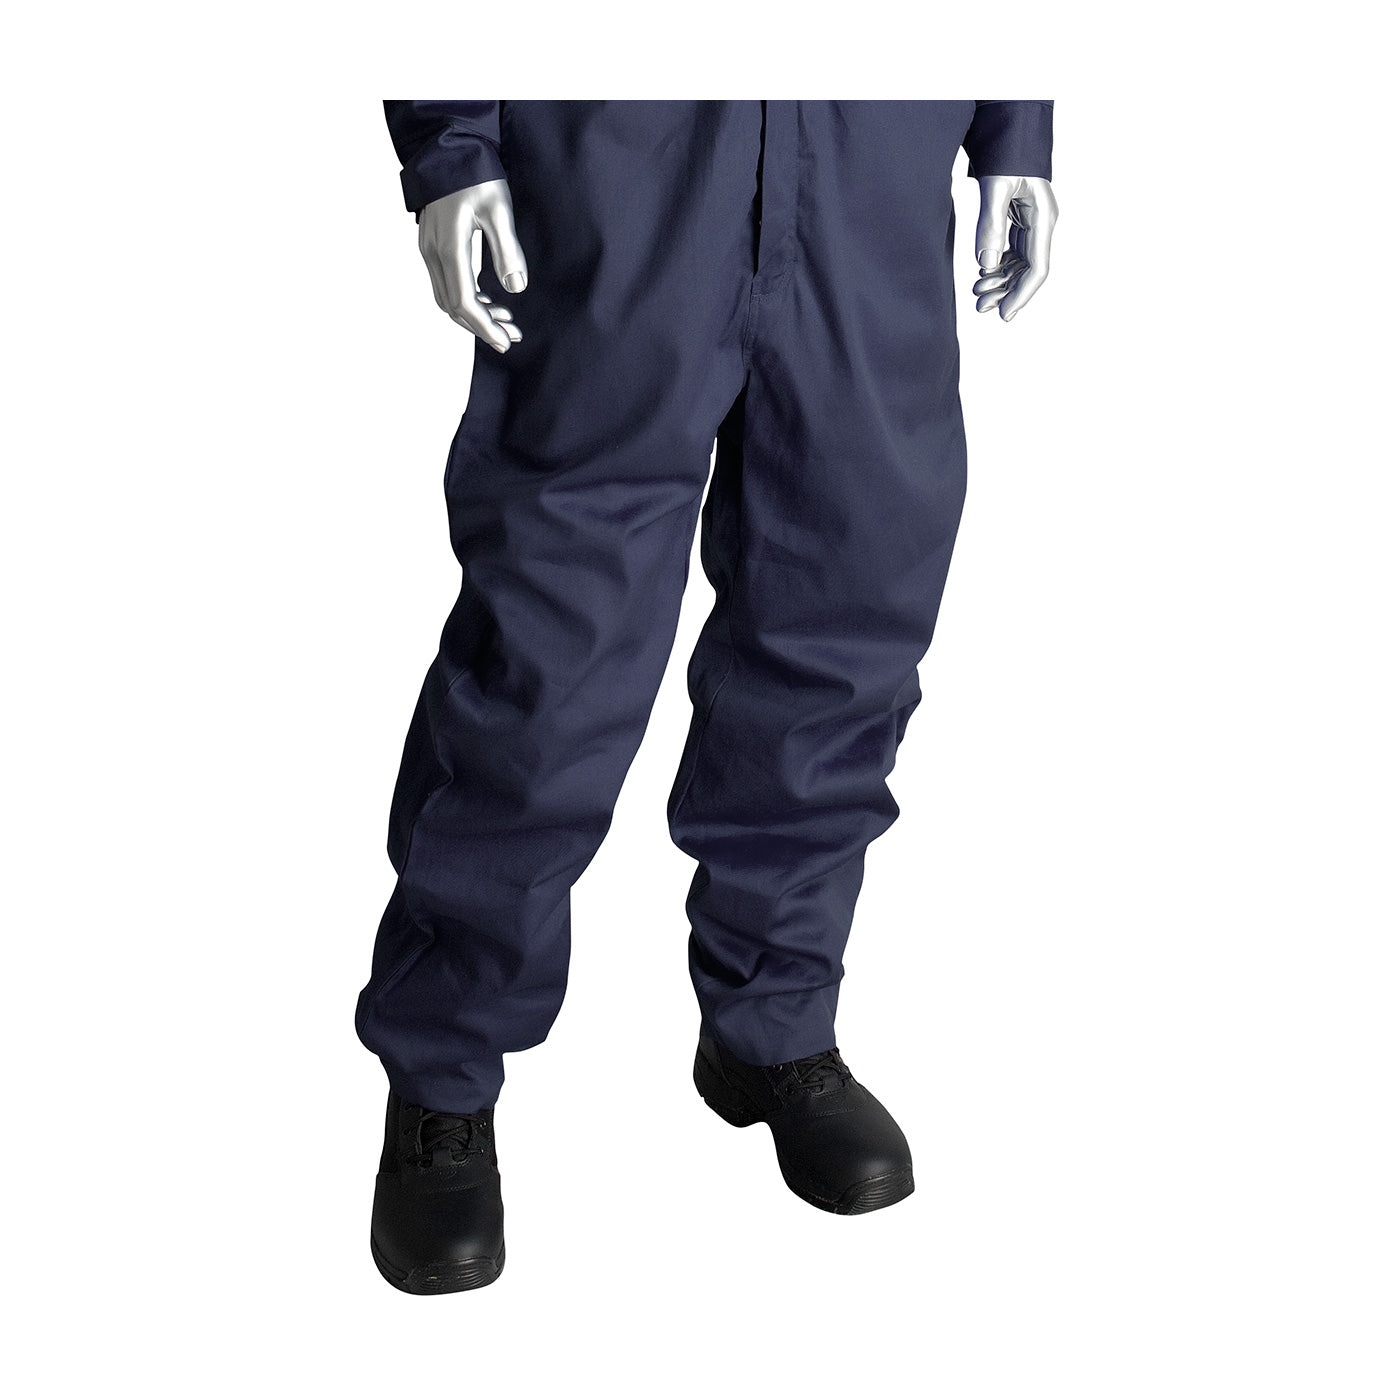 PIP 385-FRSC-NV/2X AR/FR Dual Certified Coverall with Zipper Closure - 9.2 Cal/cm2